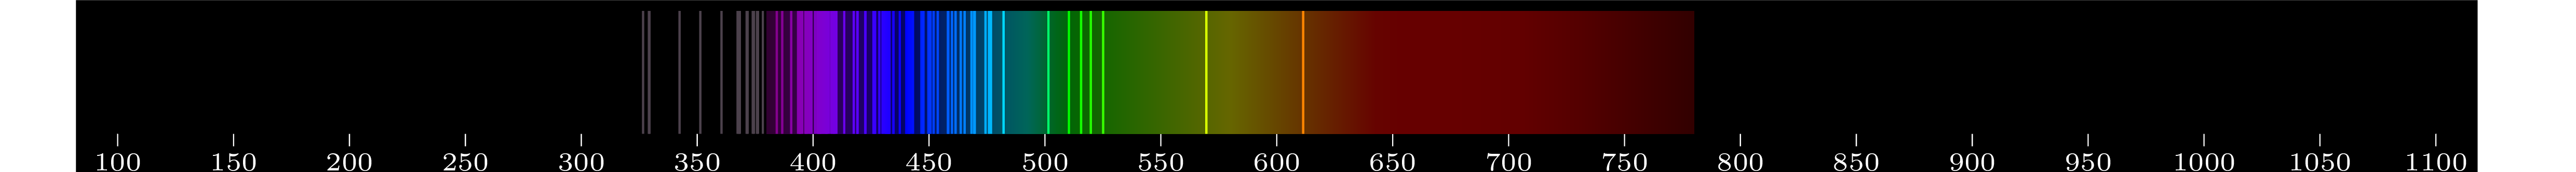 emmision spectra of element Gd